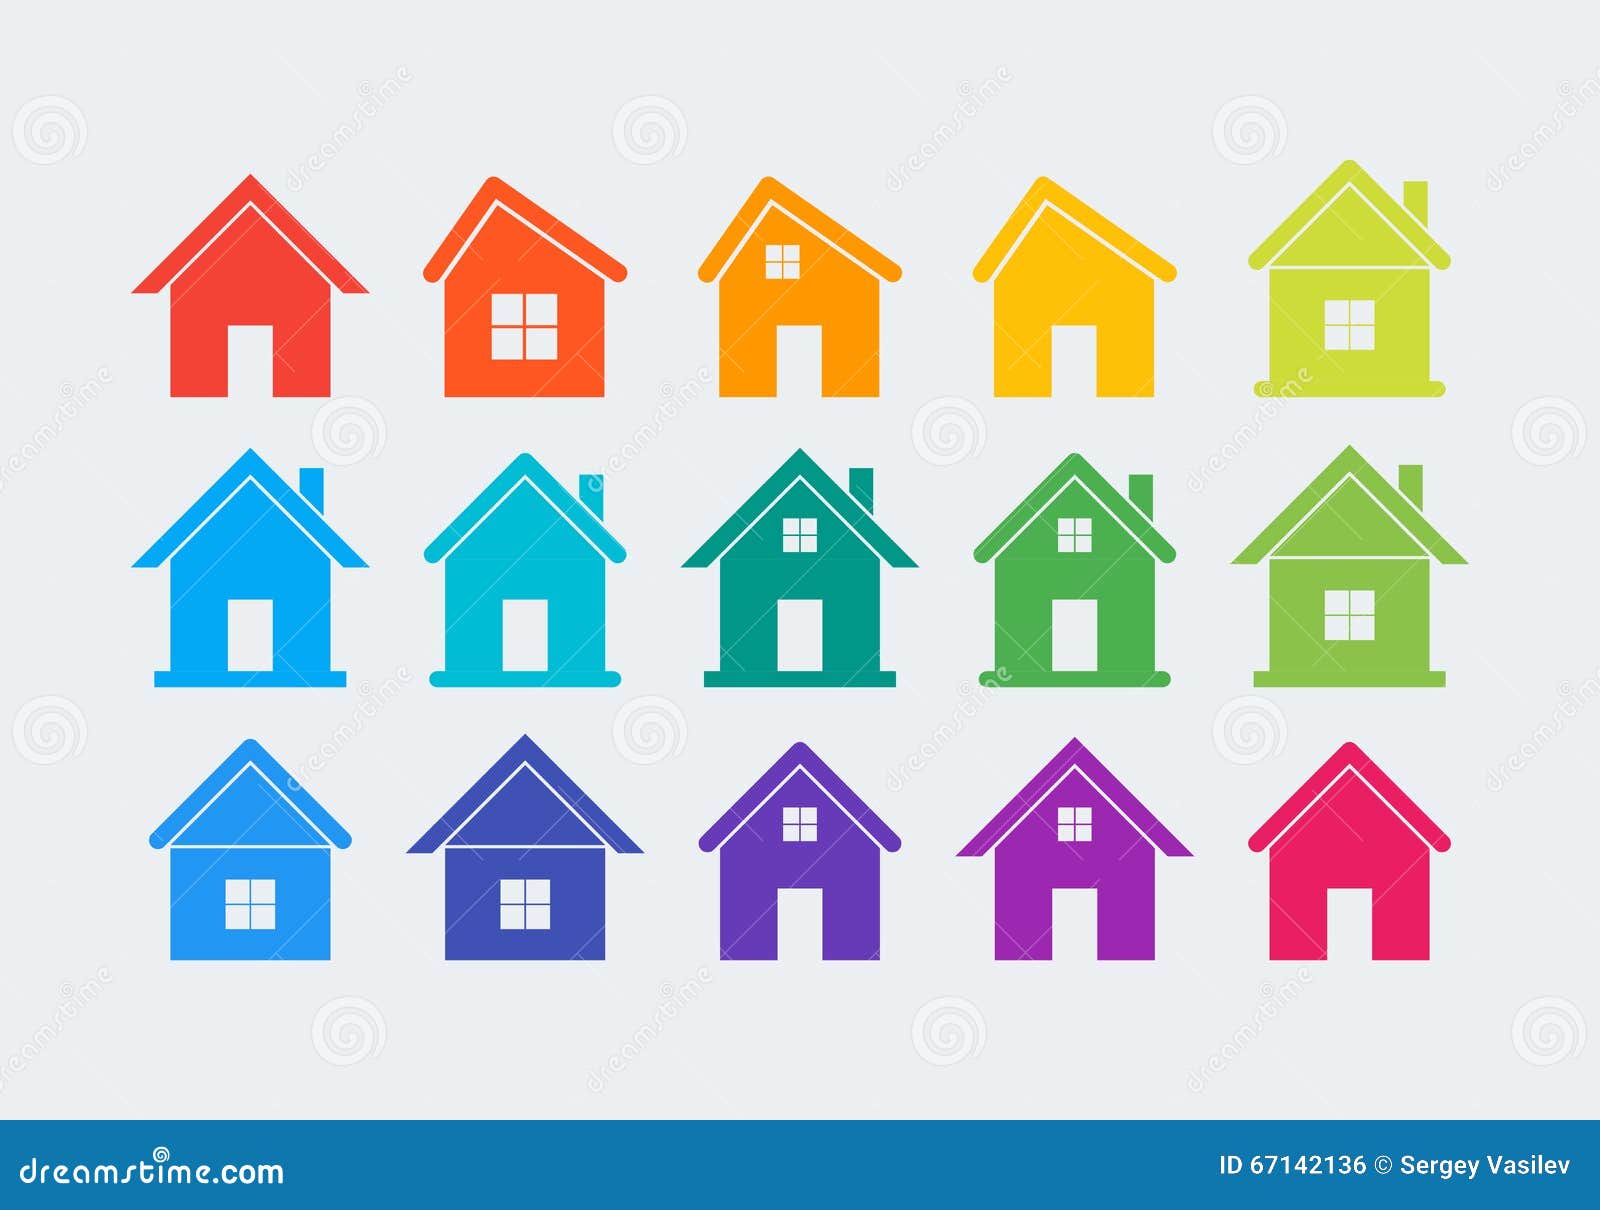 15 colored house icons stock vector. Illustration of home - 67142136